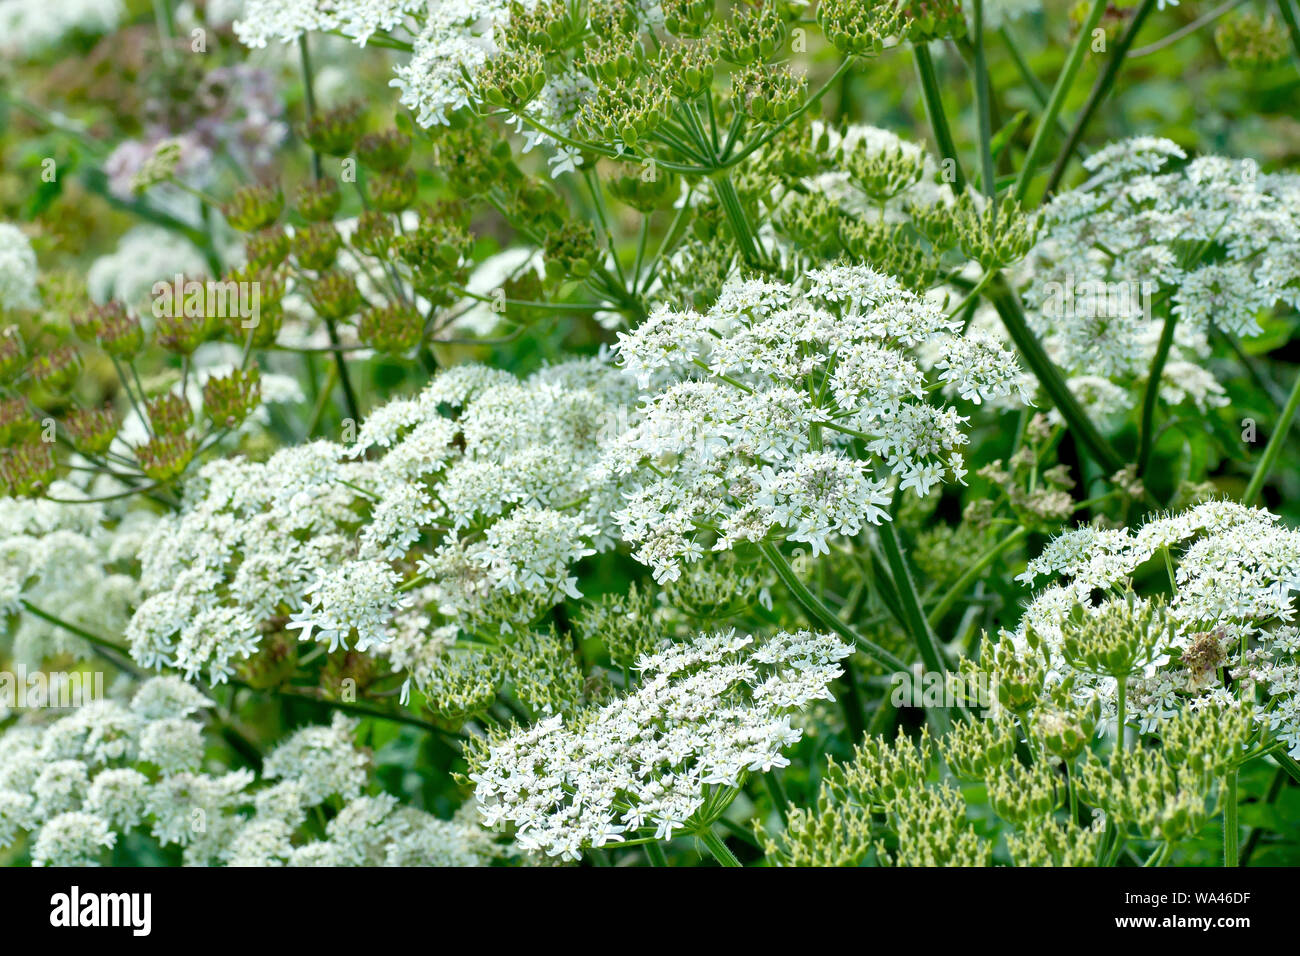 Hogweed or Cow Parsnip (heracleum sphondylium) in various stages of growth - in bud, in flower and going to seed. Stock Photo